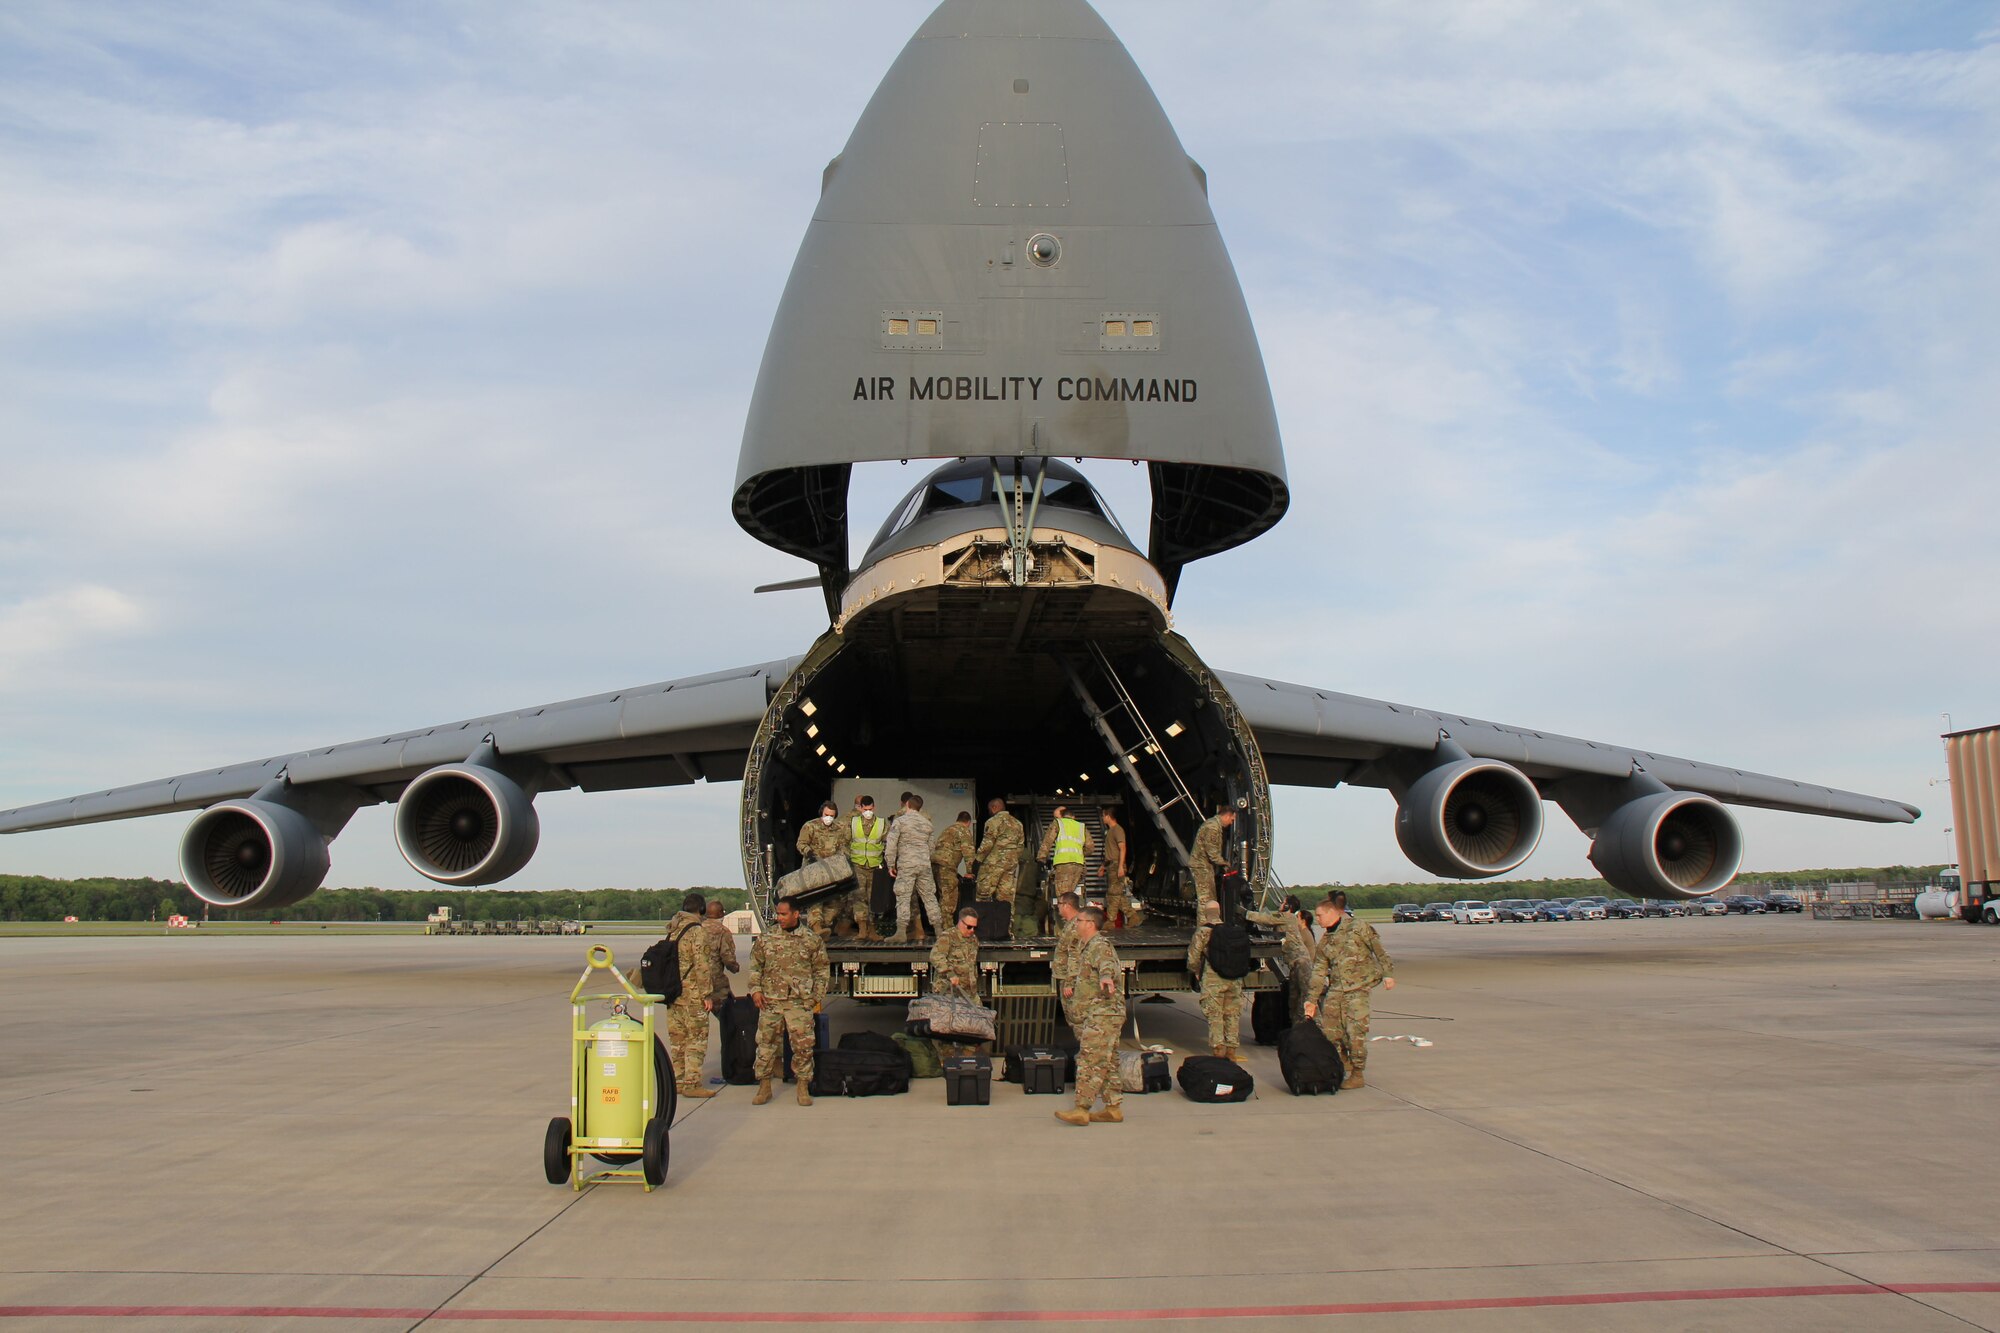 Photo shows uniformed members unloading cargo from the front end of a C-5 Galaxy aircraft.